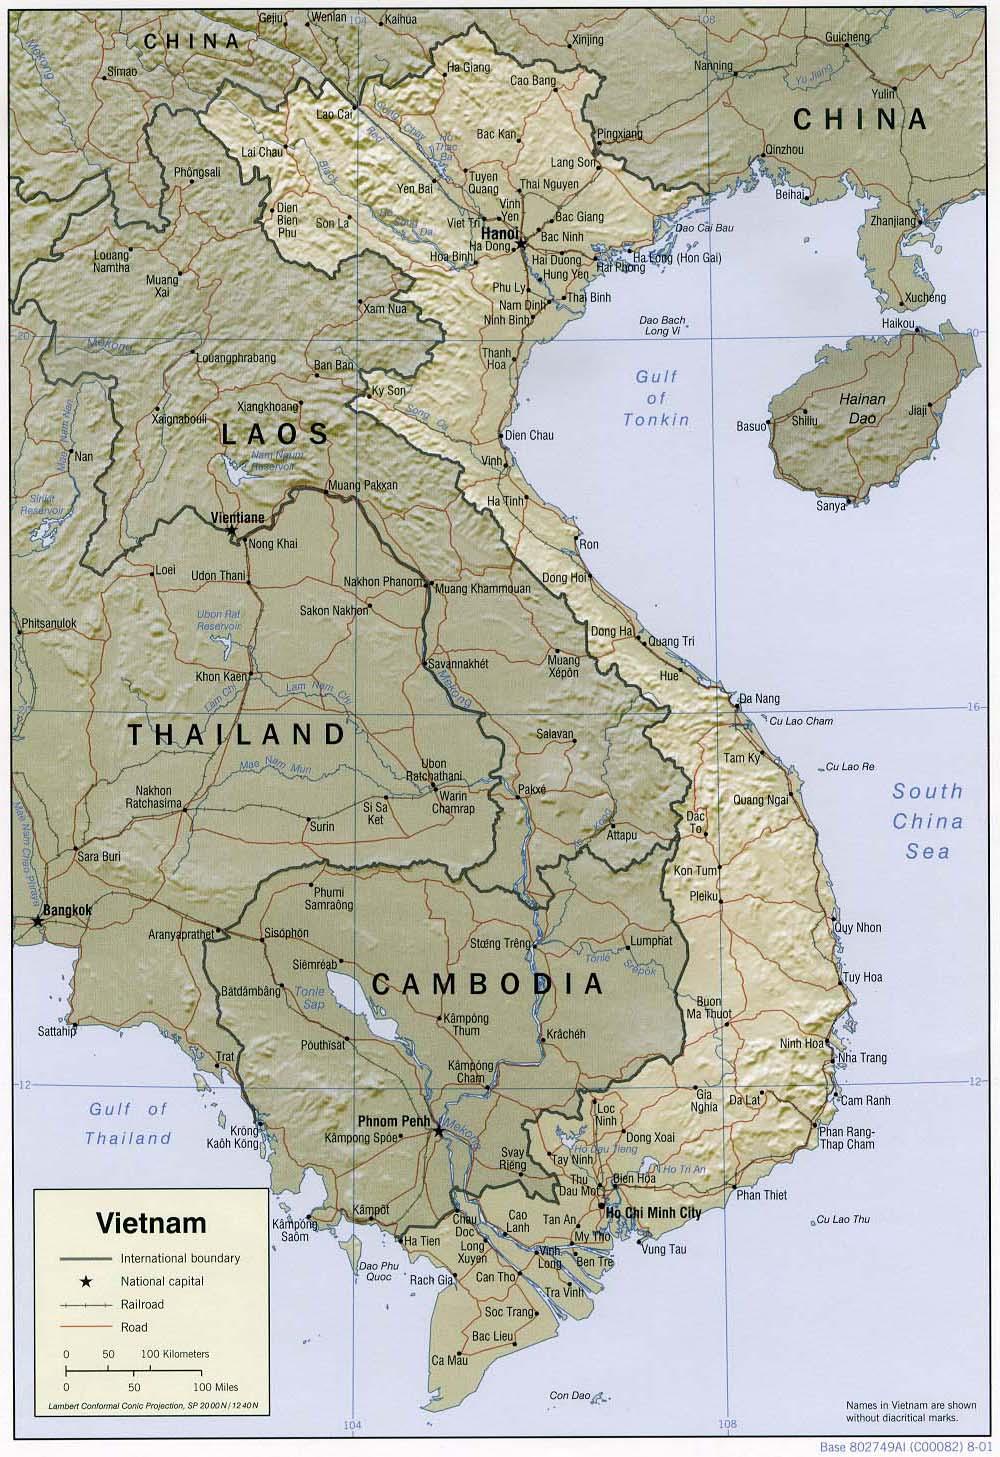 Vietnam facts Marine potential 84 million people 330,000 km 2 Pangasius catfish in the Mekong Delta (freshwater)